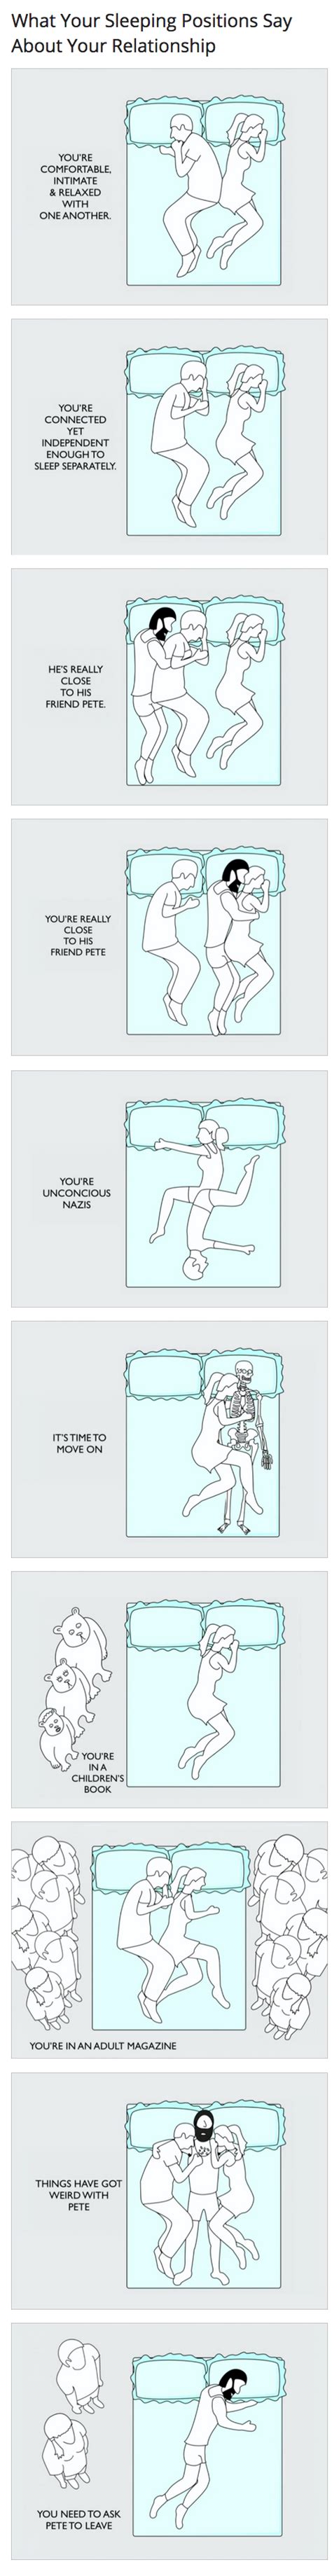 What Your Sleeping Positions Say About Your Relationship